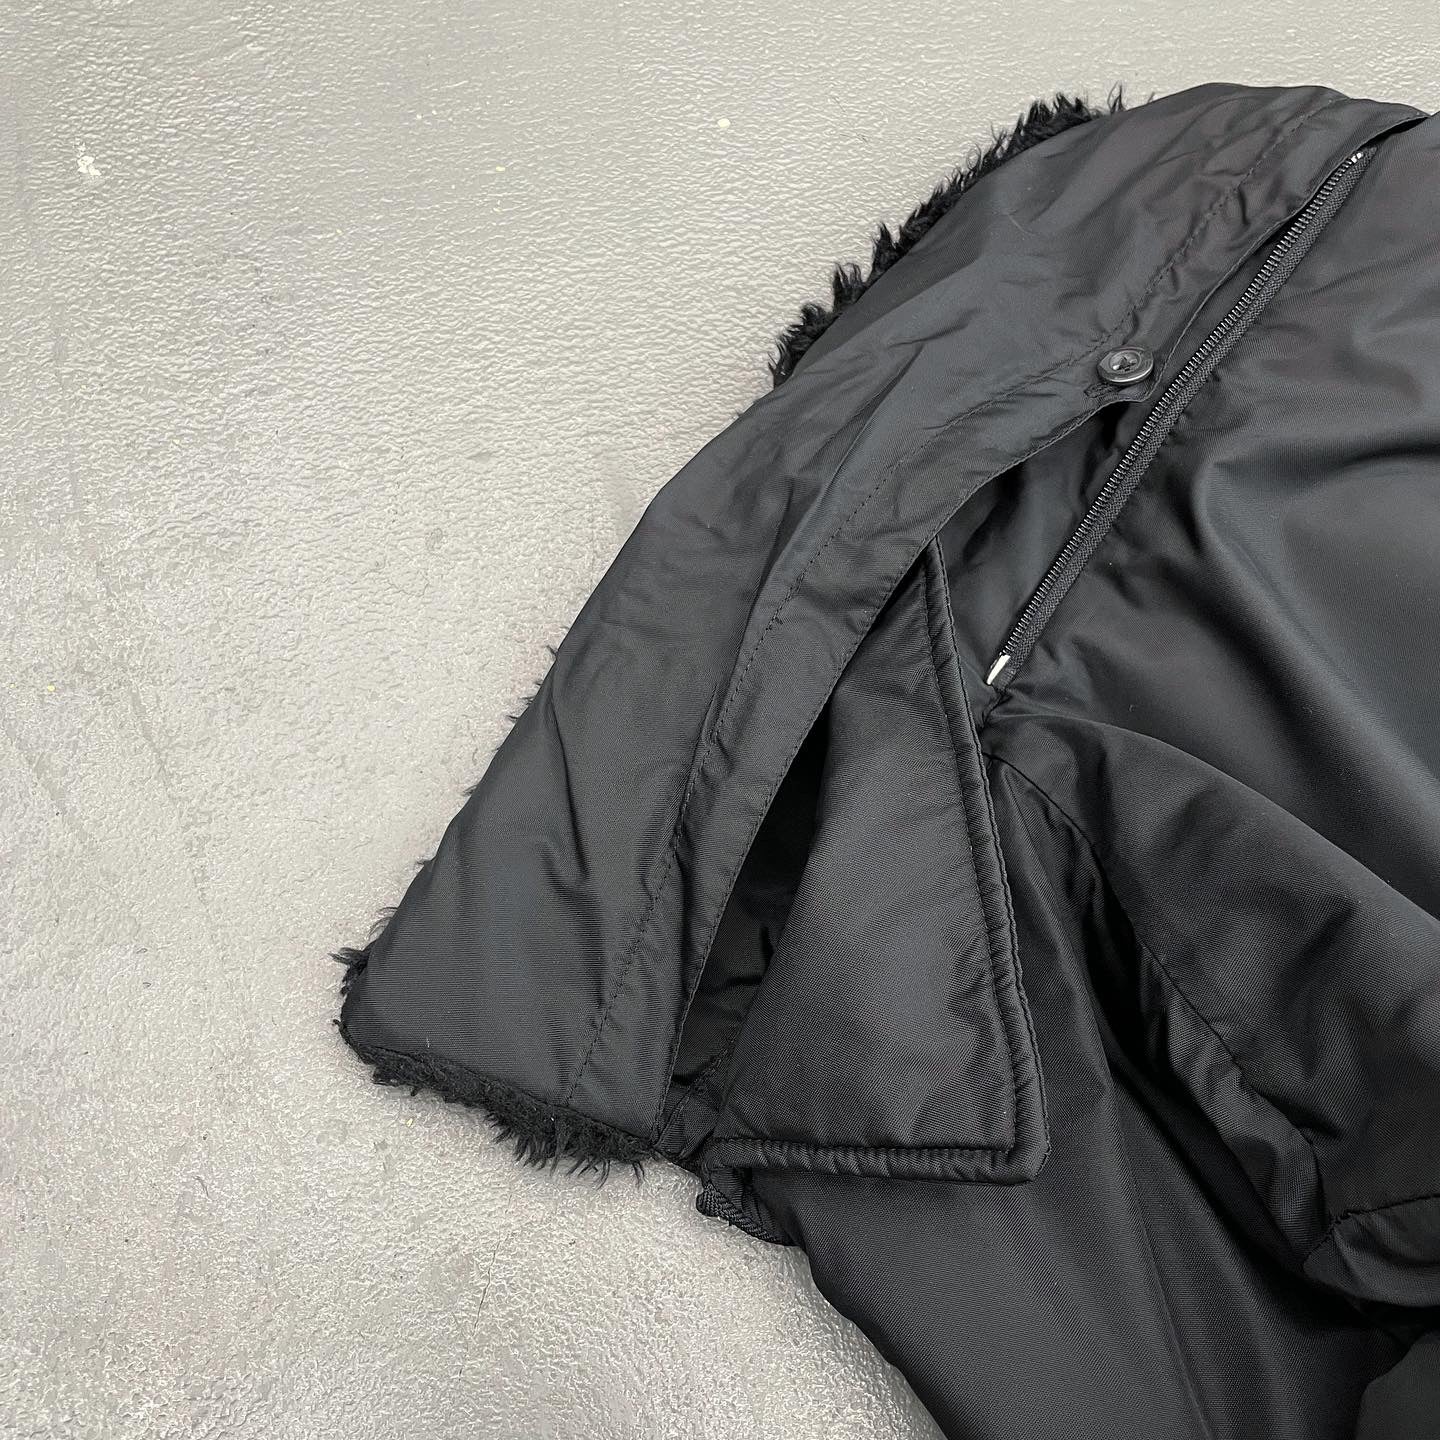 LINCOLN CENTER for the Performing Arts Winter Nylon Jacket